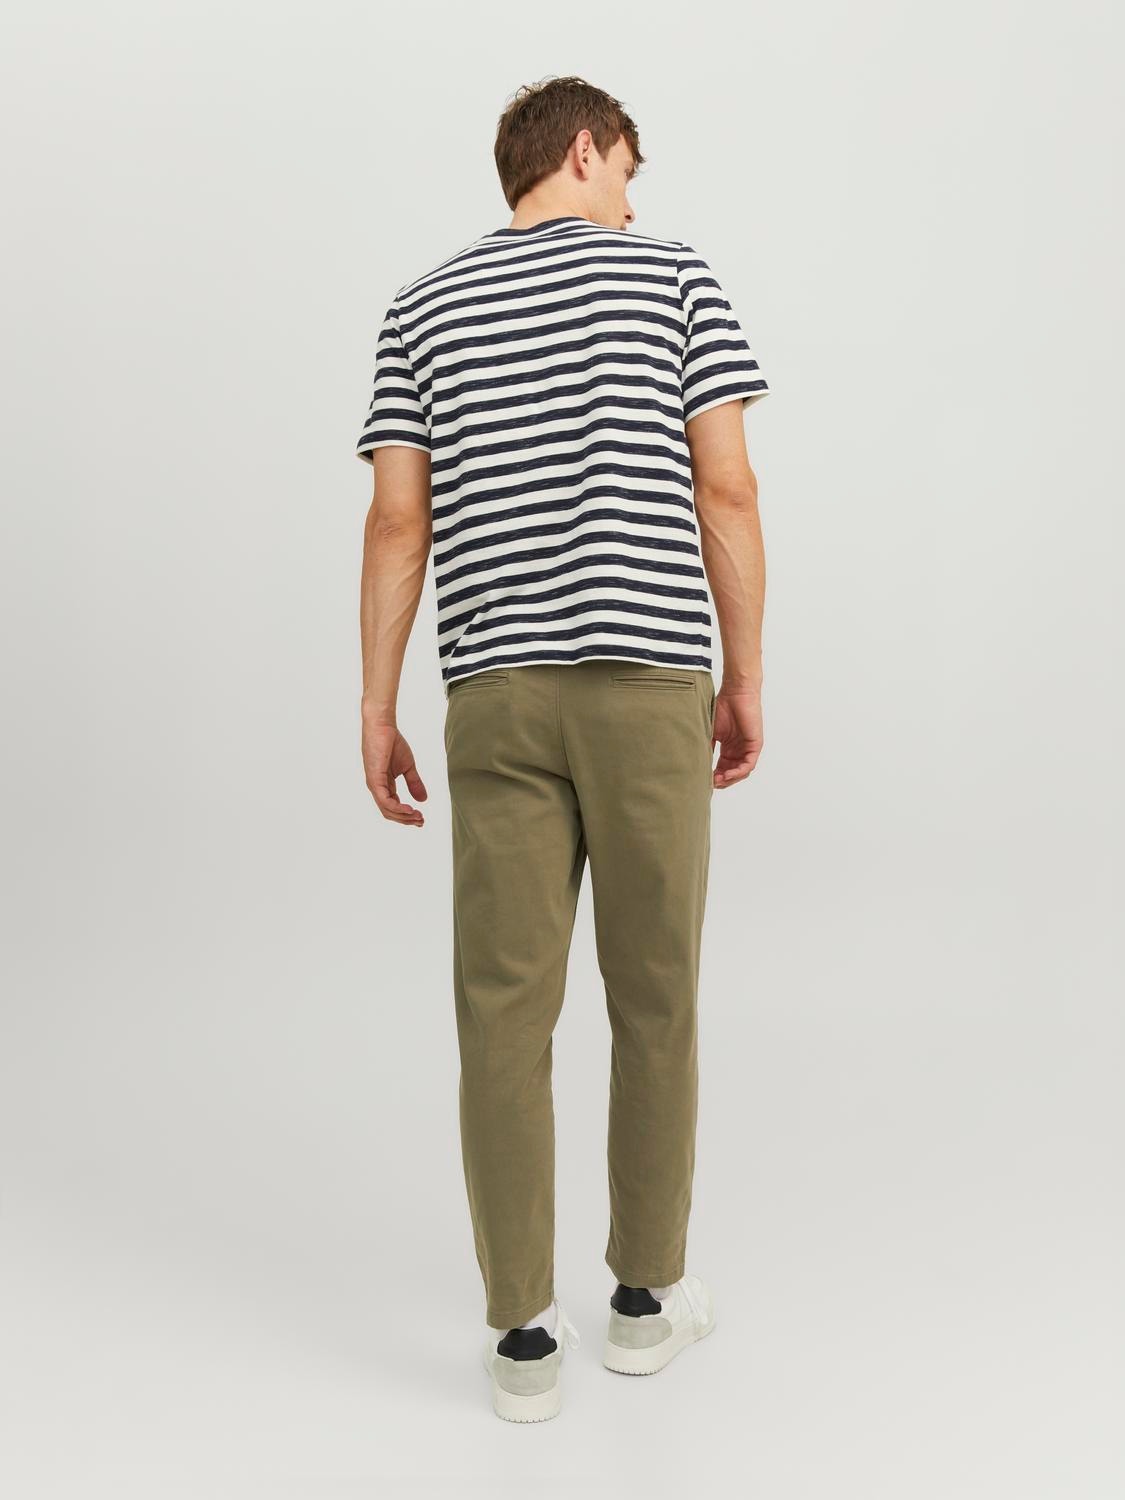 Jack & Jones Παντελόνι Tapered Fit Chinos -Dusty Olive - 12242188